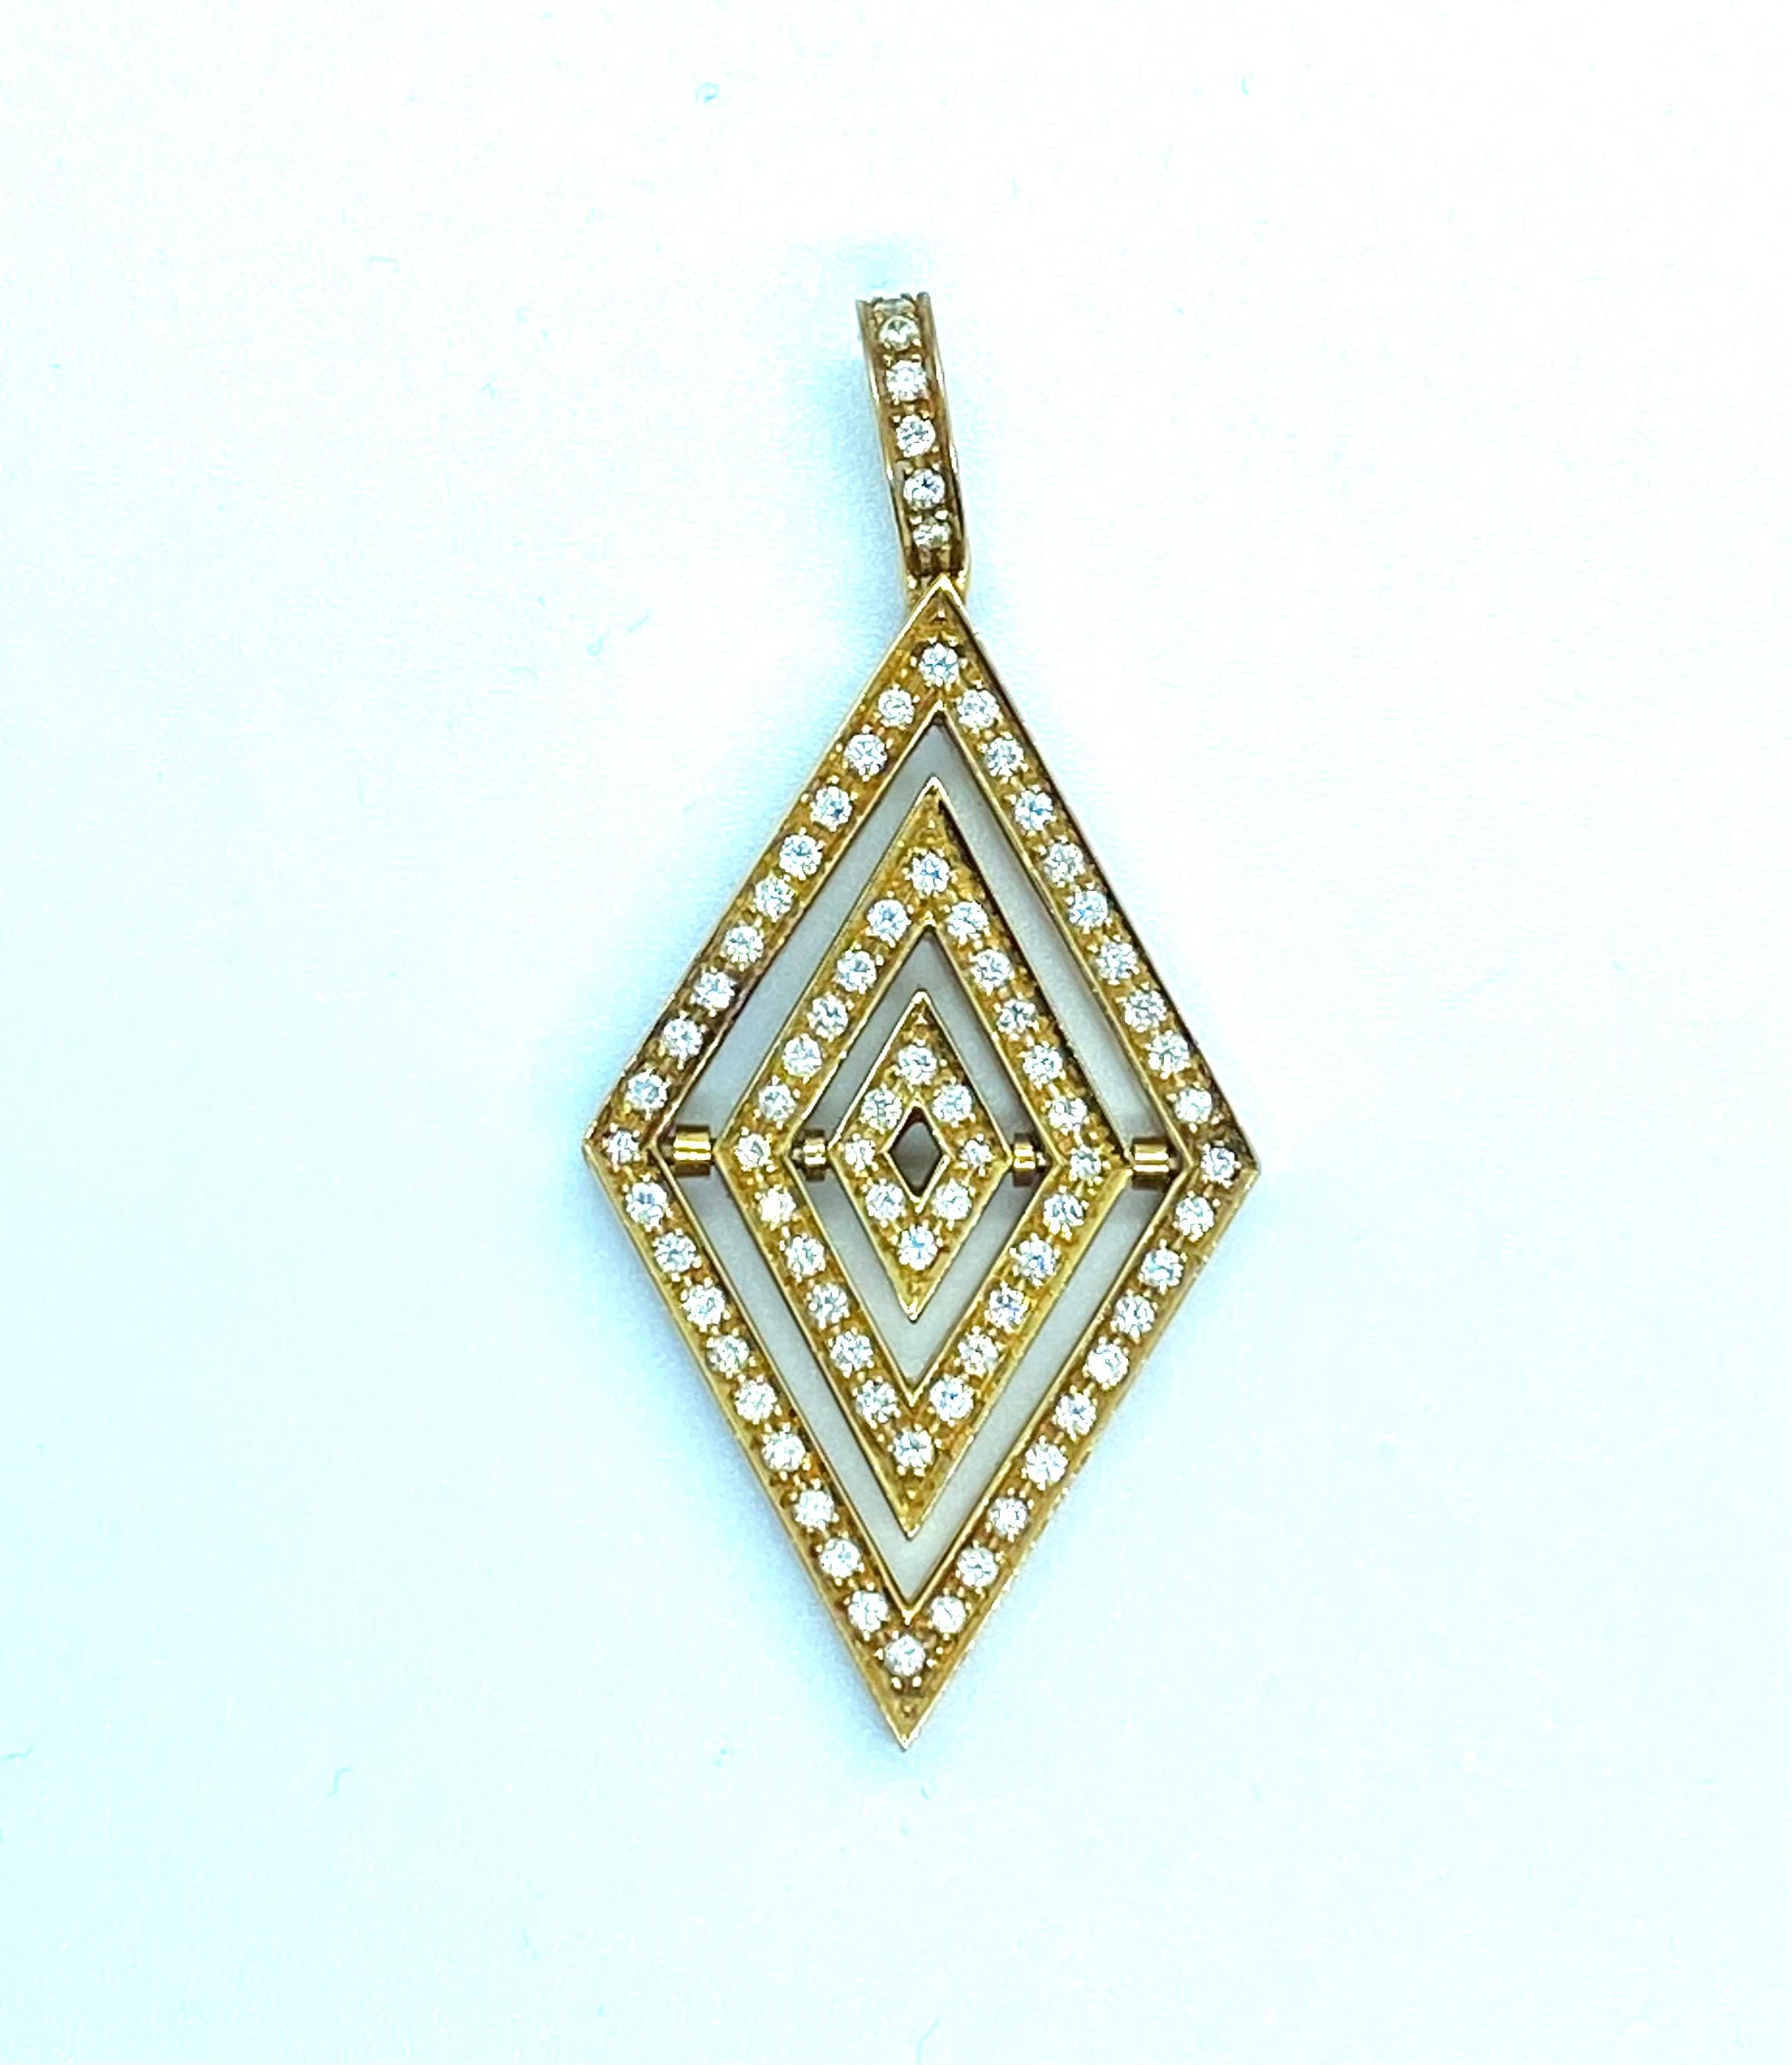 Elegant pendant in the shape of a rhombus, made of yellow 18K gold
On one side No. 83 brilliant cut diamonds, estimated weight of ct. 0.02 each.
On the opposite side No. 40 sapphires, weighing ct. 0.035 each, n. 24 rubies, weighing ct. 0.035 each